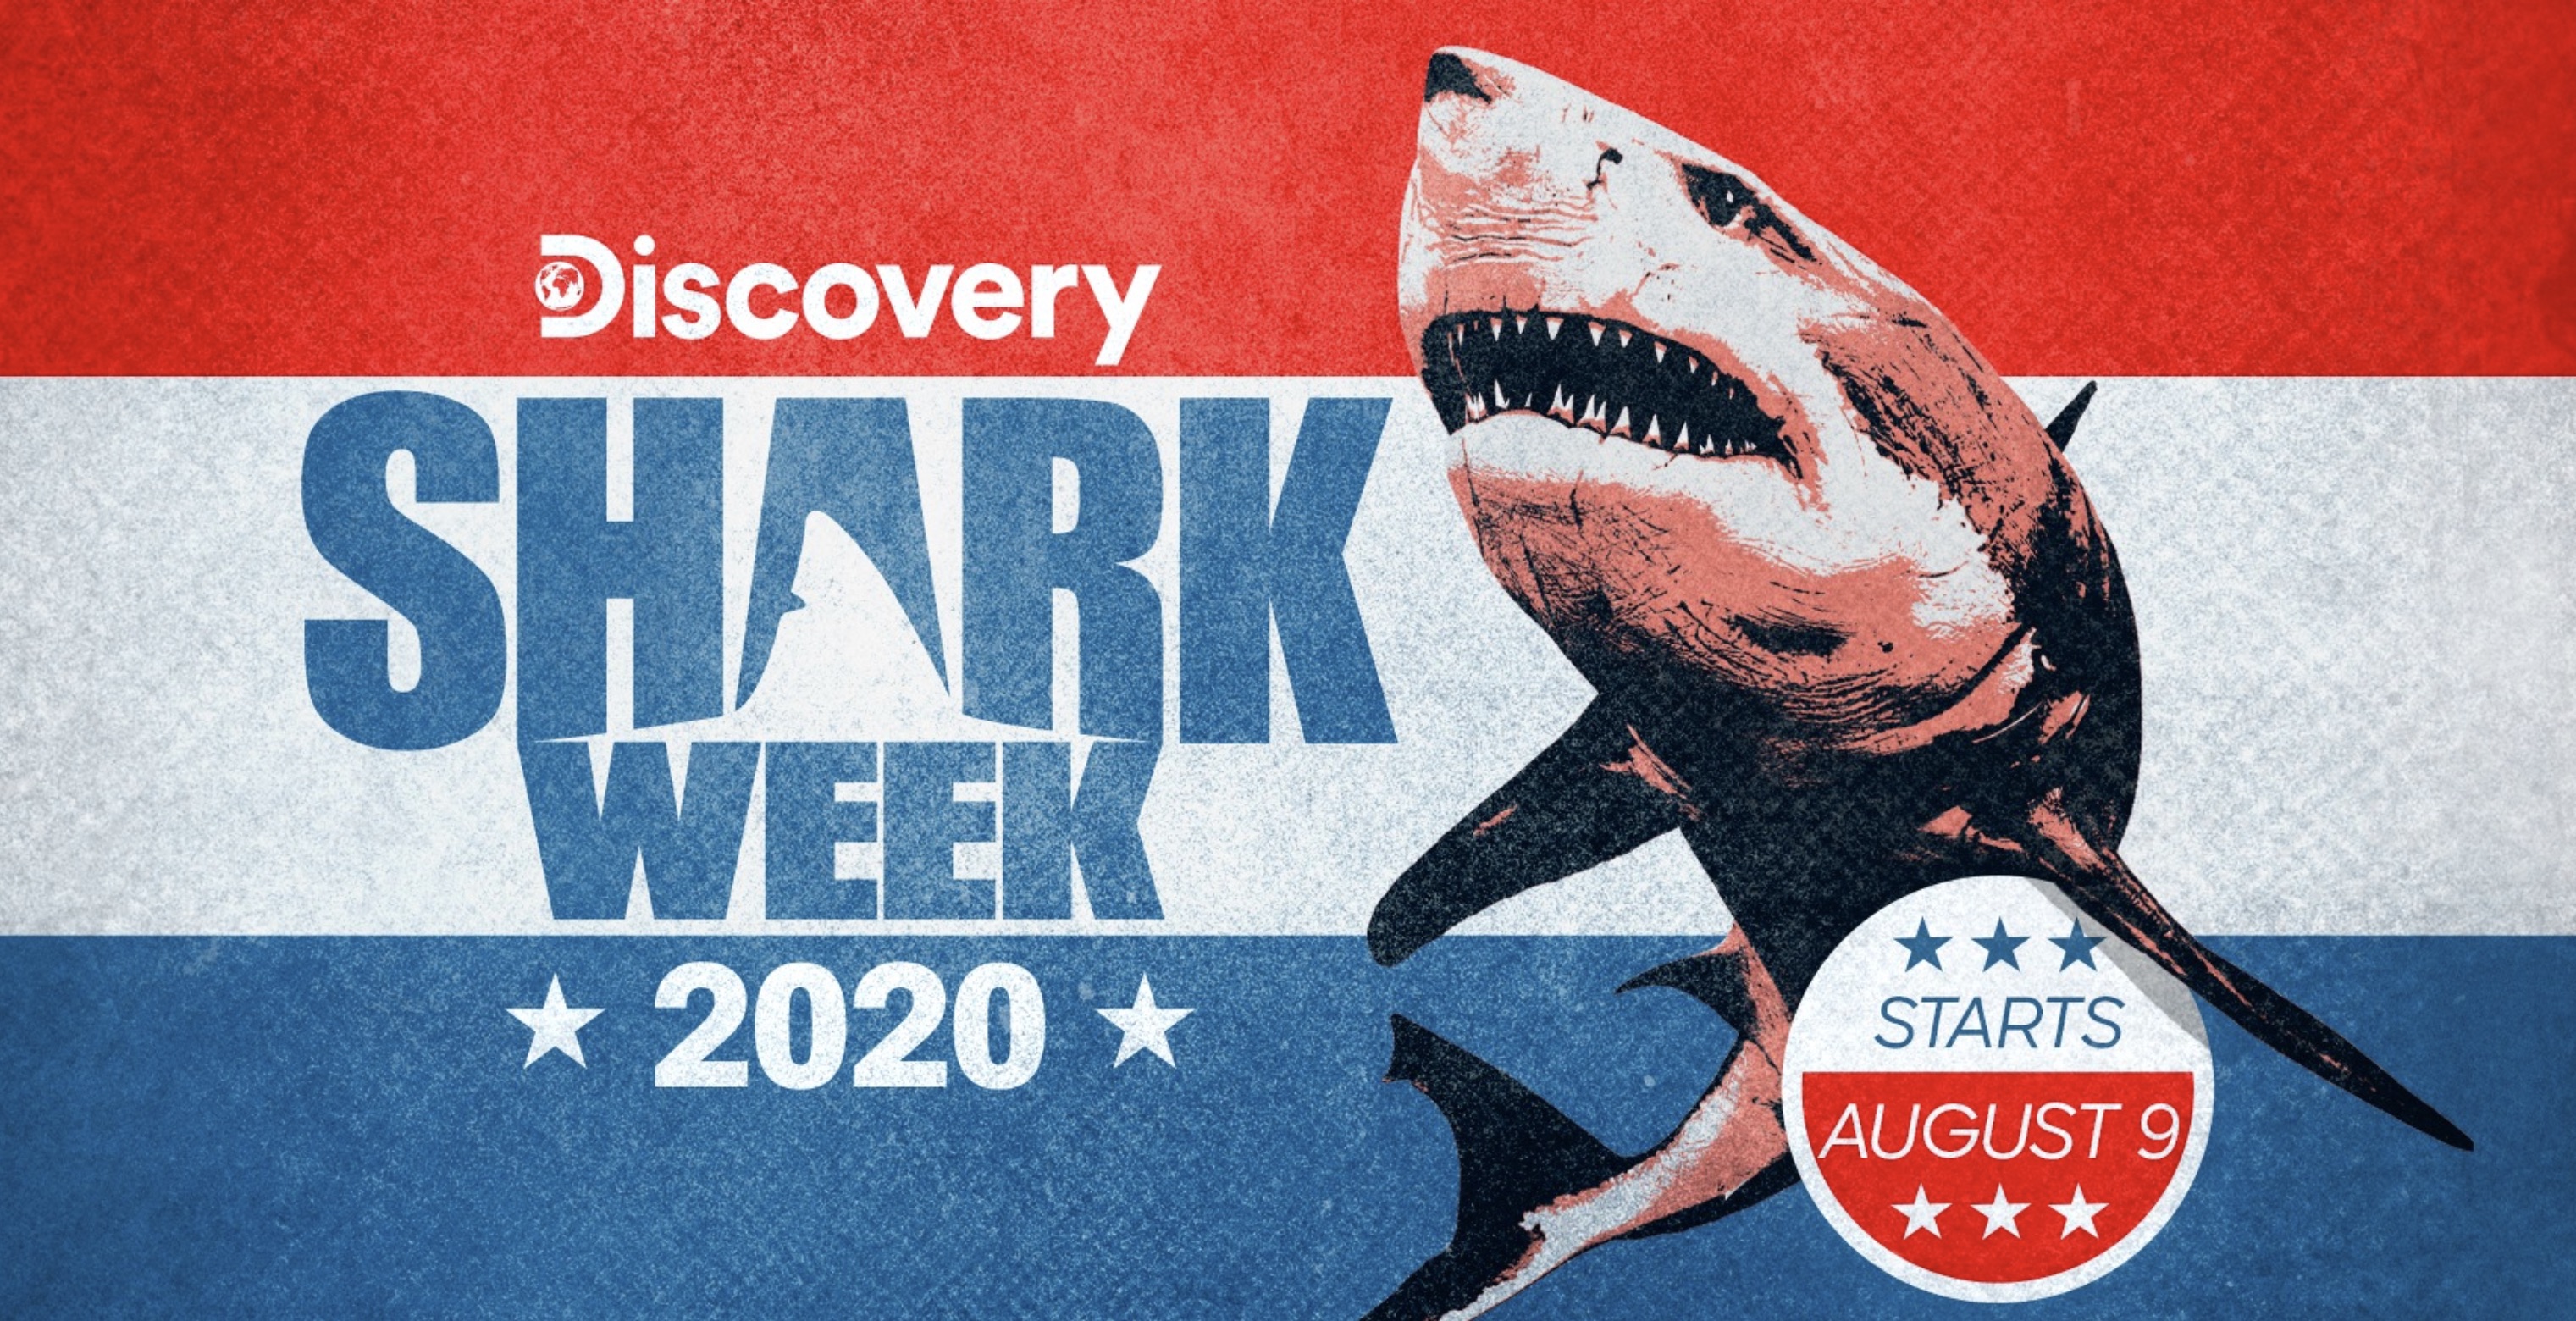 Get ready for Discovery Channel’s Shark Week 2020, with Mike Tyson